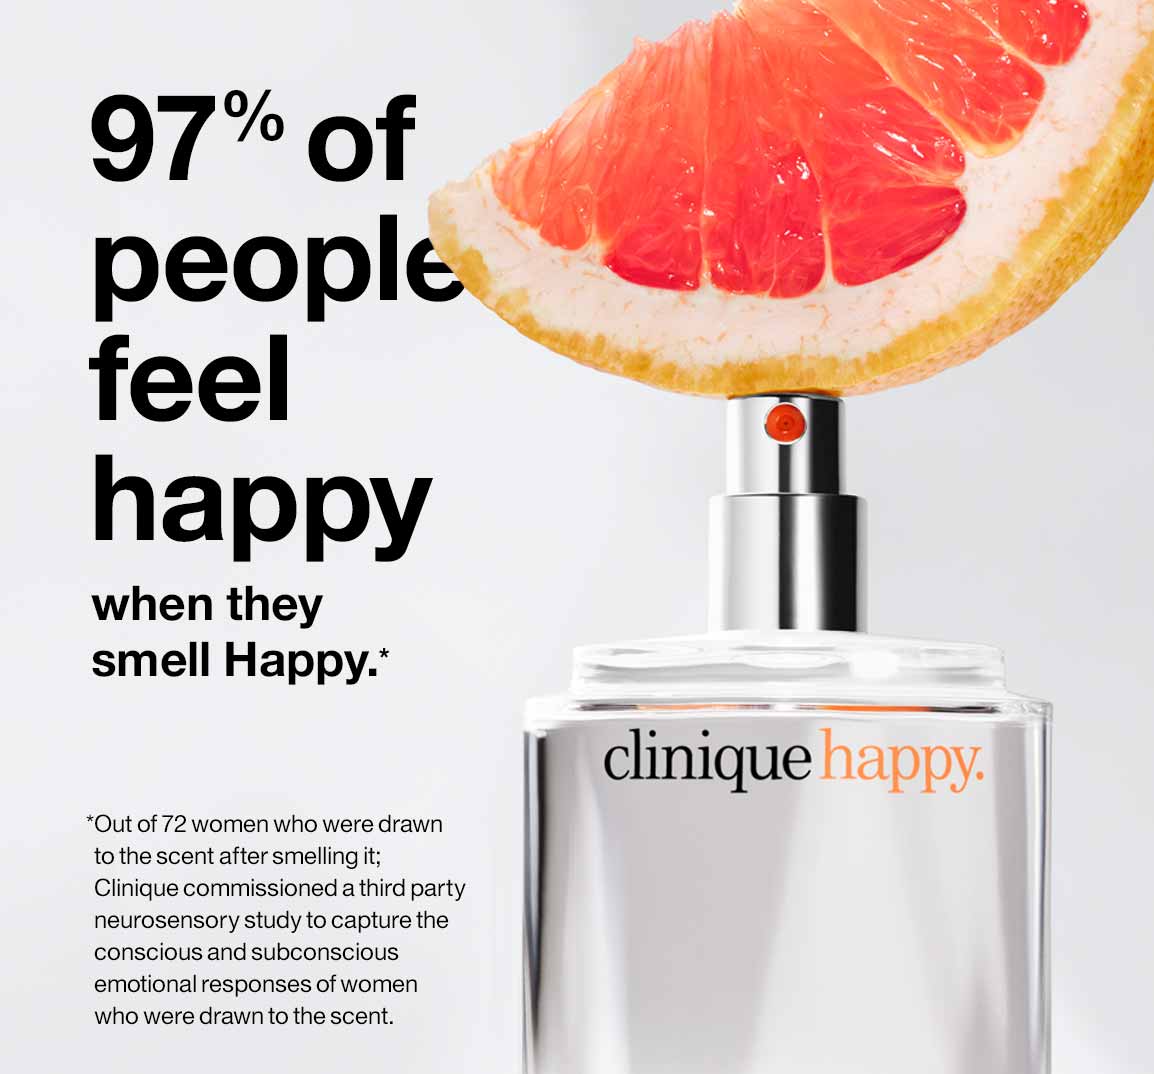 97% of people feel happy when they smell Happy.*